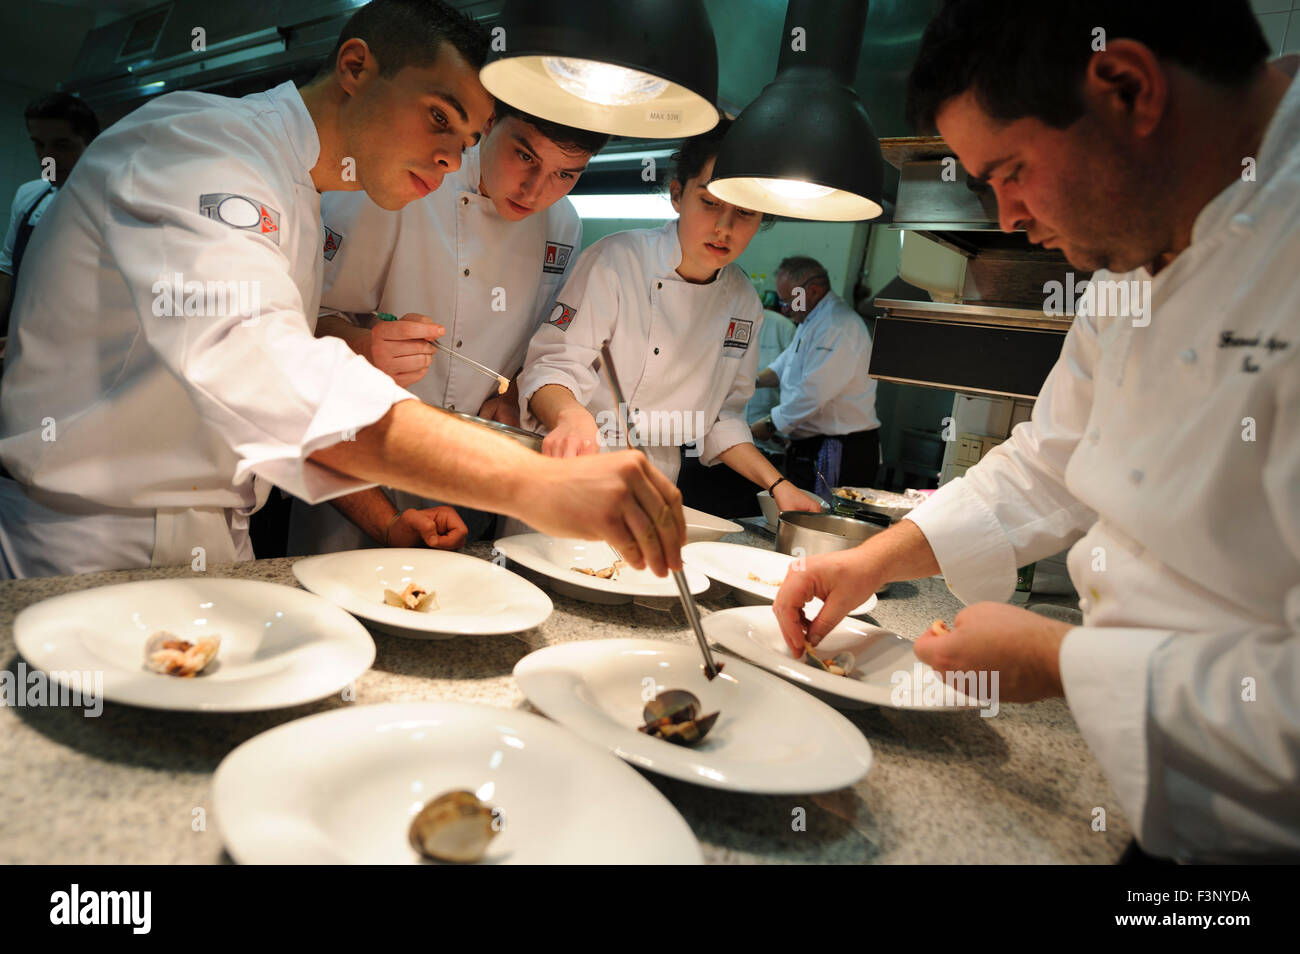 Chefs plating gourmet food Stock Photo